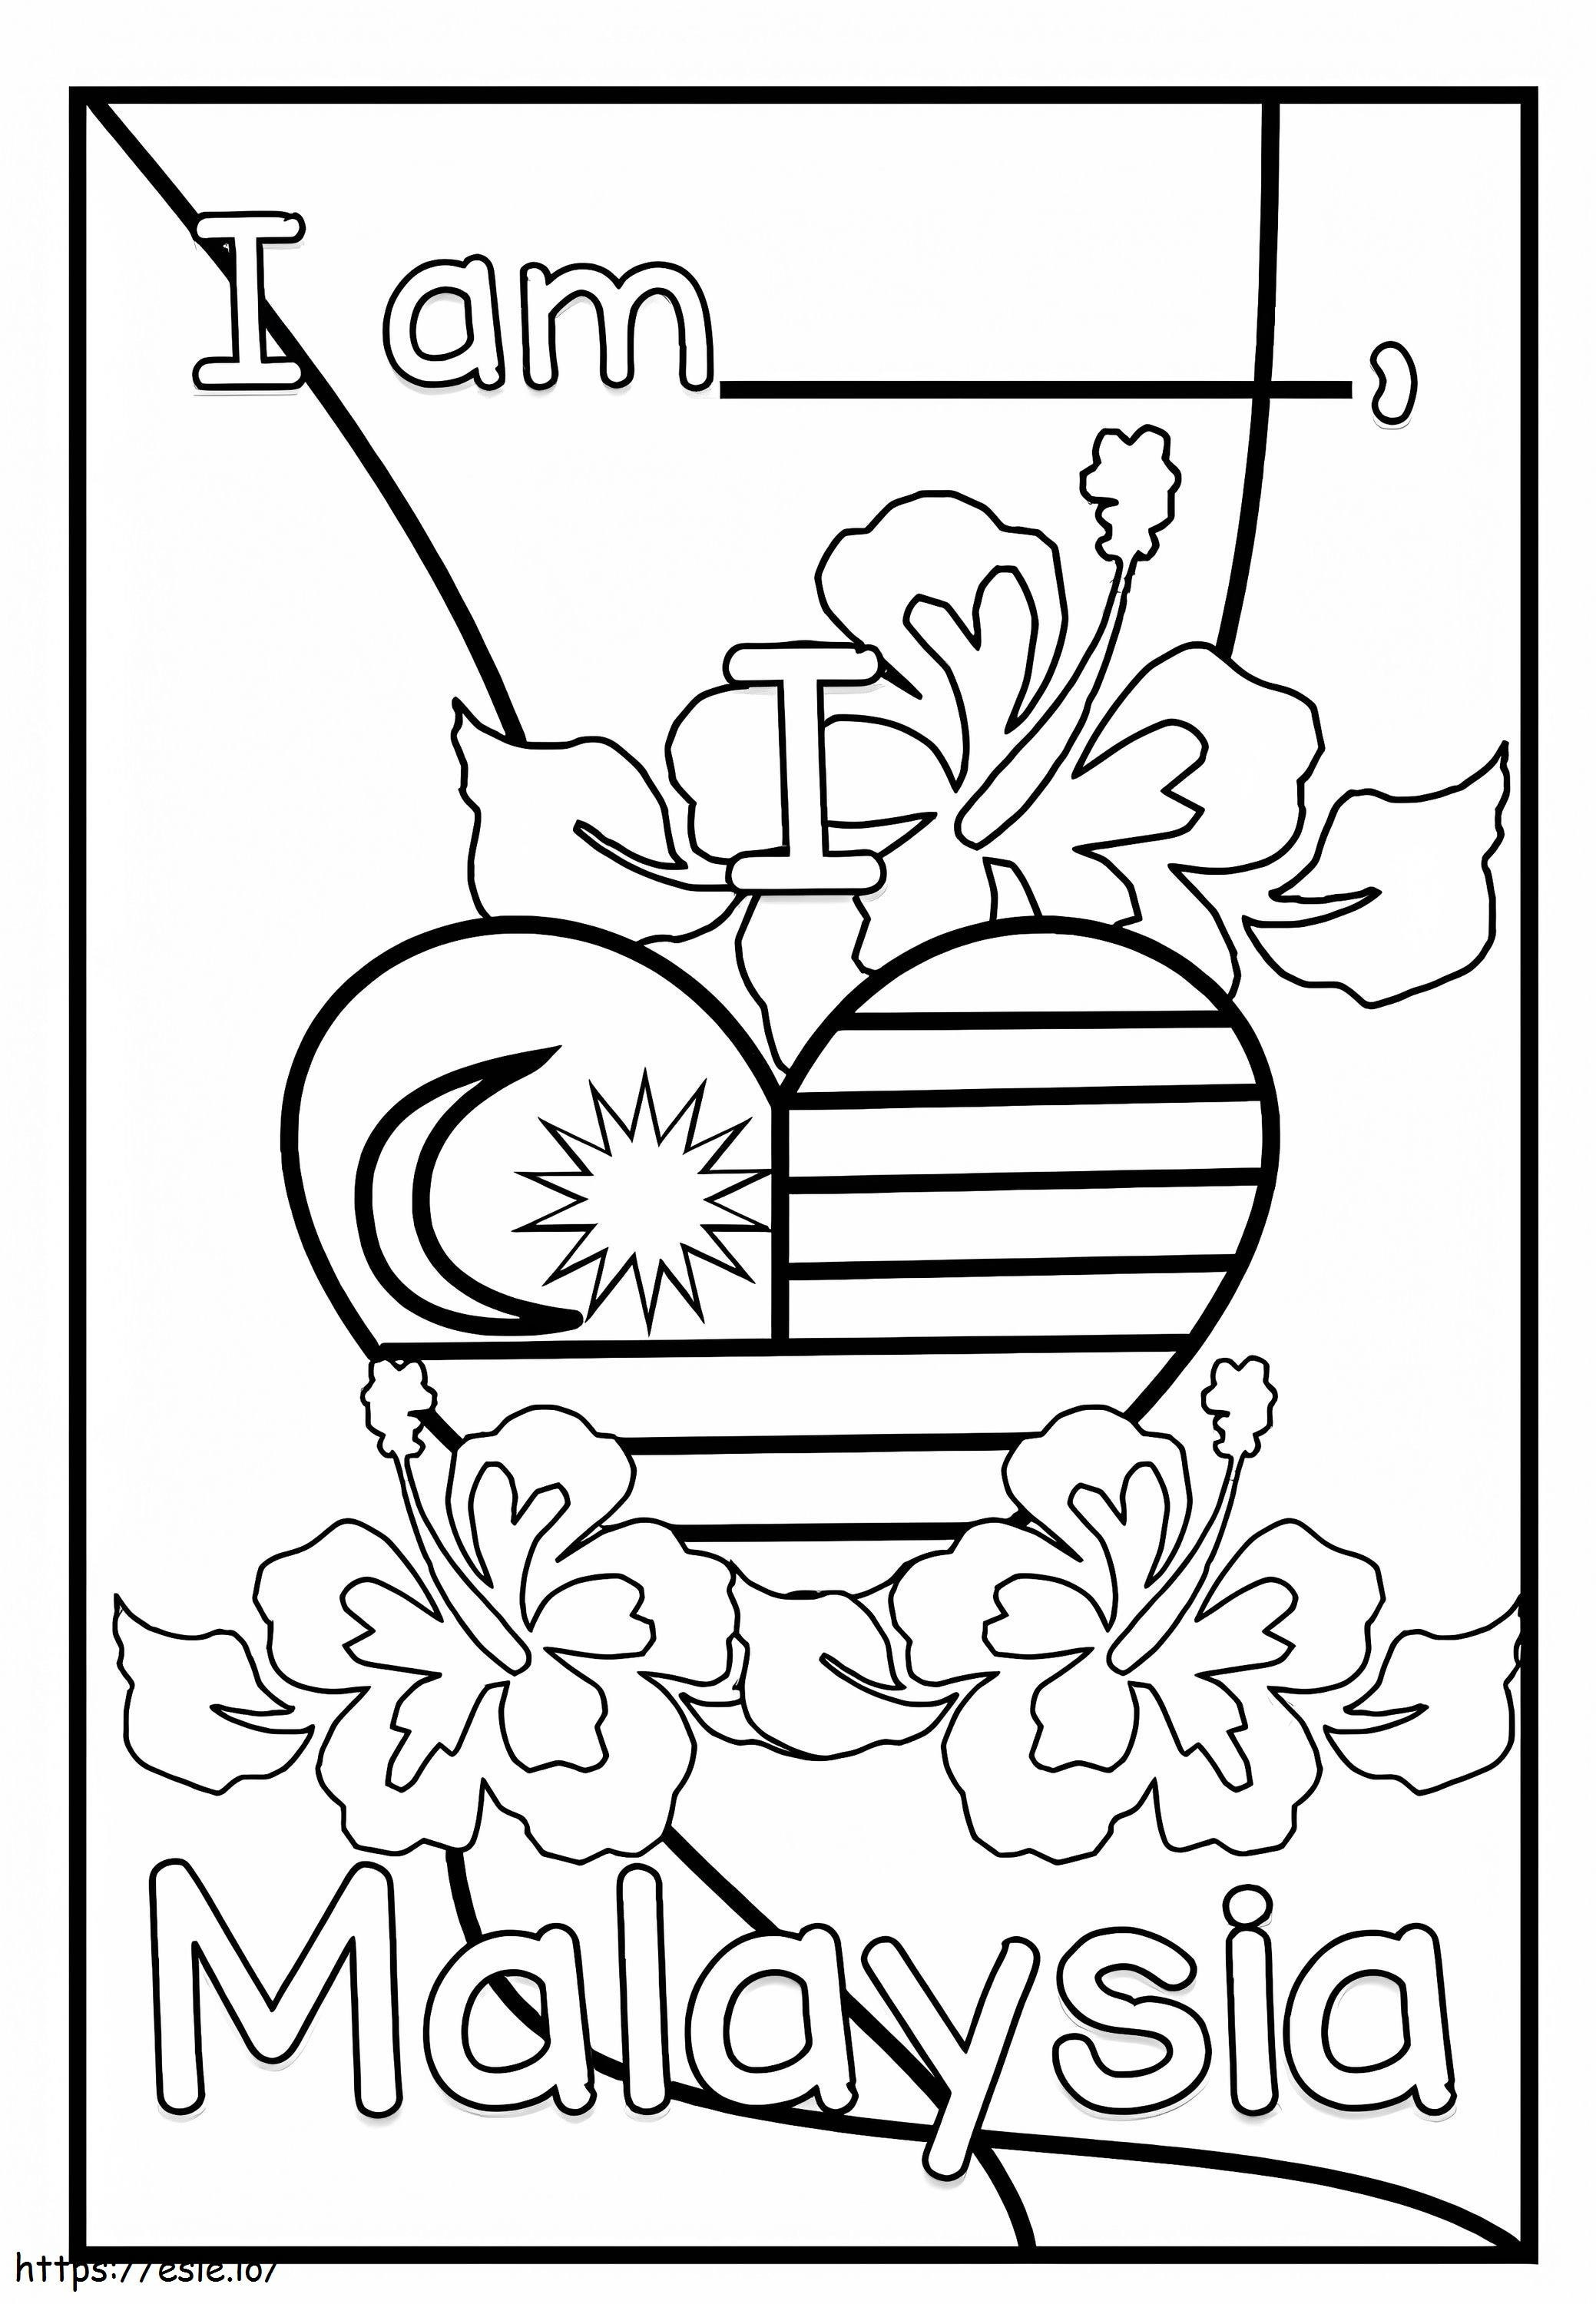 Malaysia 2 coloring page